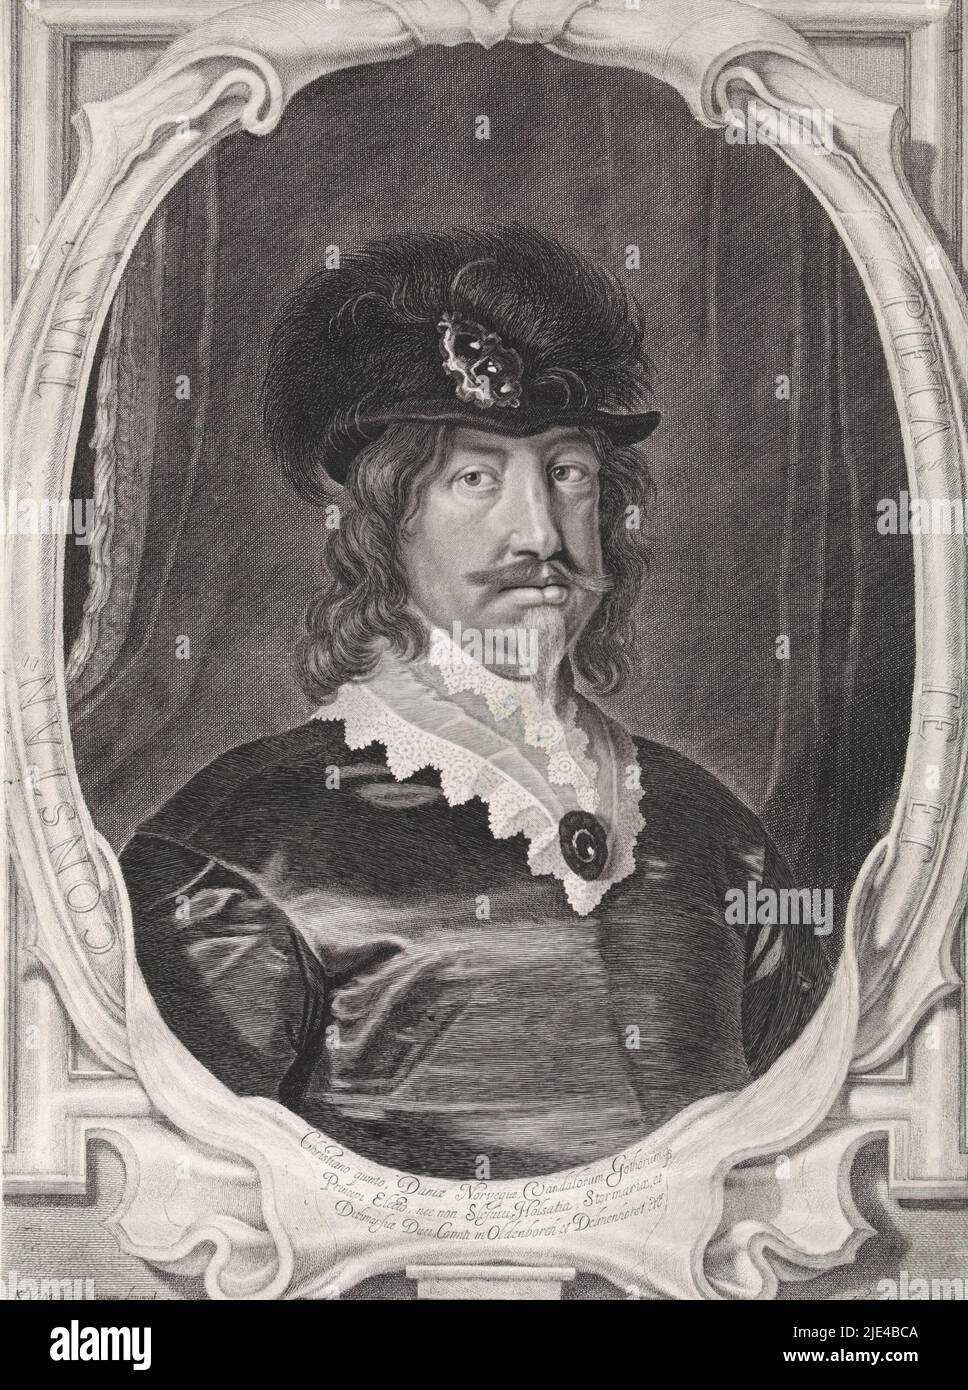 Portrait of Christian of Denmark and Norway, Albert Haelwegh, after Karel van Mander, 1643, Portrait of Christian of Denmark and Norway, in an oval cartouche. On his head a hat with a feather which is fastened with a brooch., print maker: Albert Haelwegh, (mentioned on object), after: Karel van Mander, (mentioned on object), Copenhagen (city), 1643, paper, etching, engraving, h 555 mm × w 405 mm Stock Photo